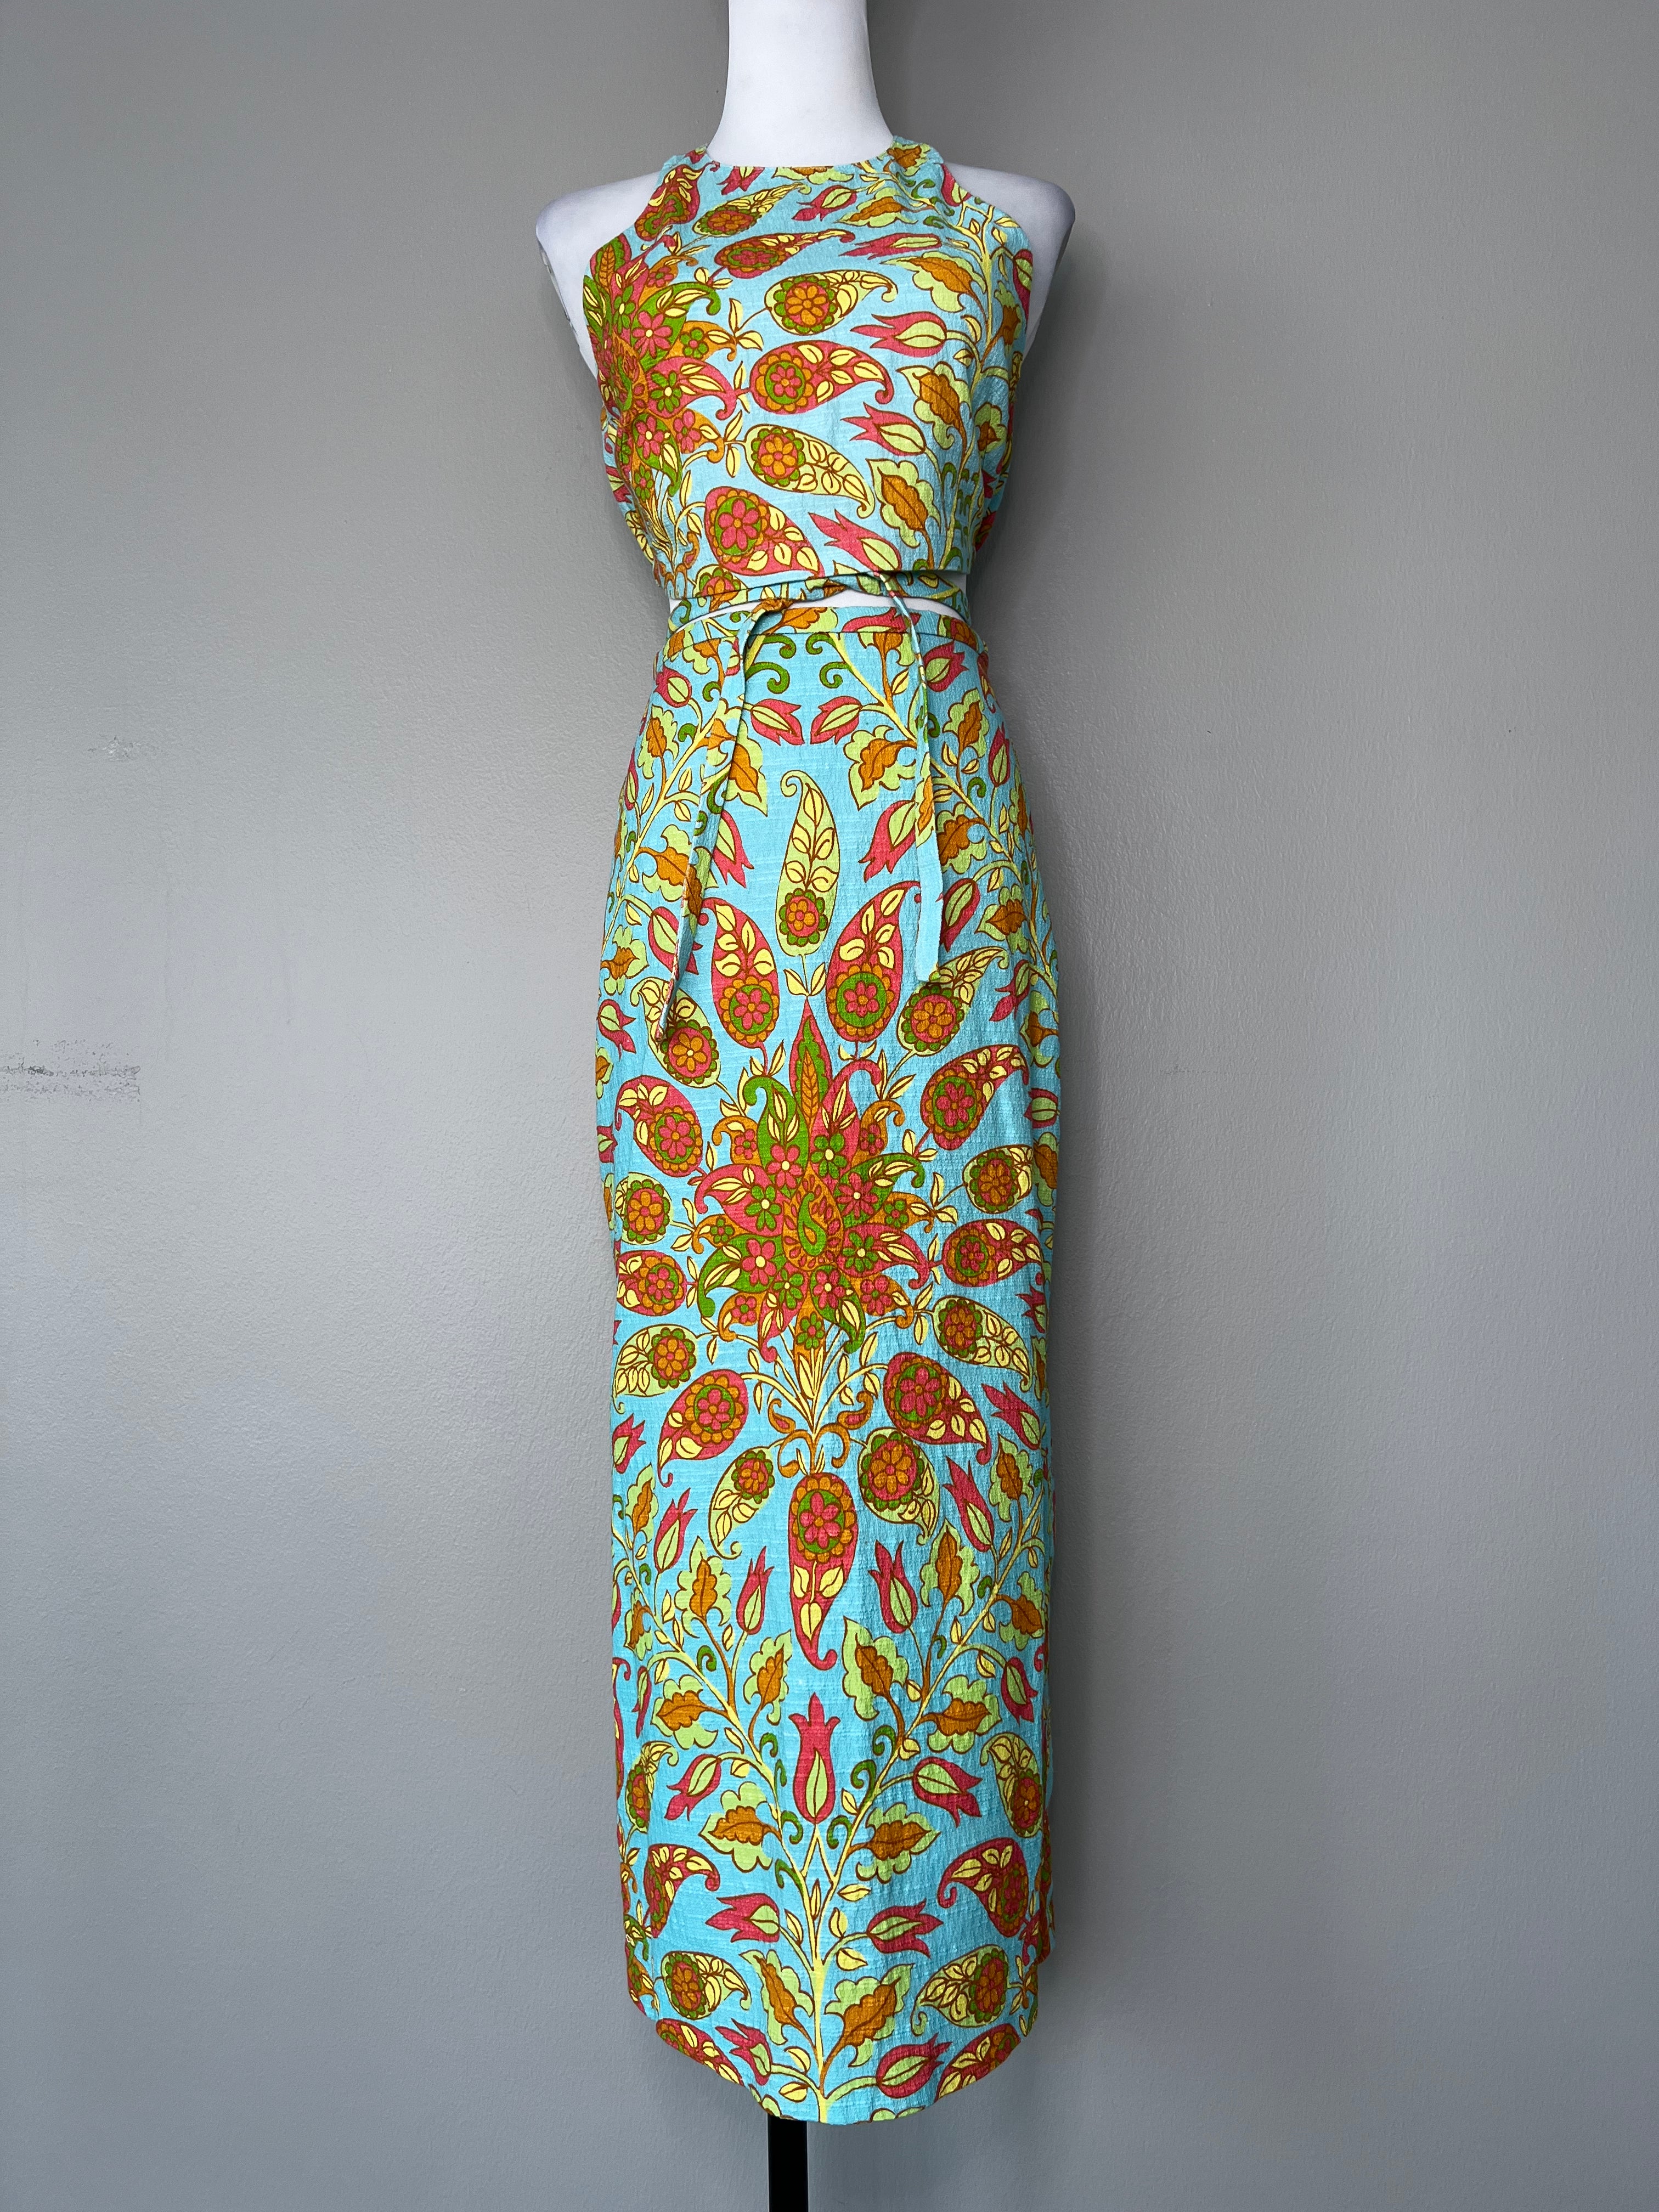 A set of long midi hippy 1960's floral paisley Turquoise Skirt with crop top backless set - ZARA